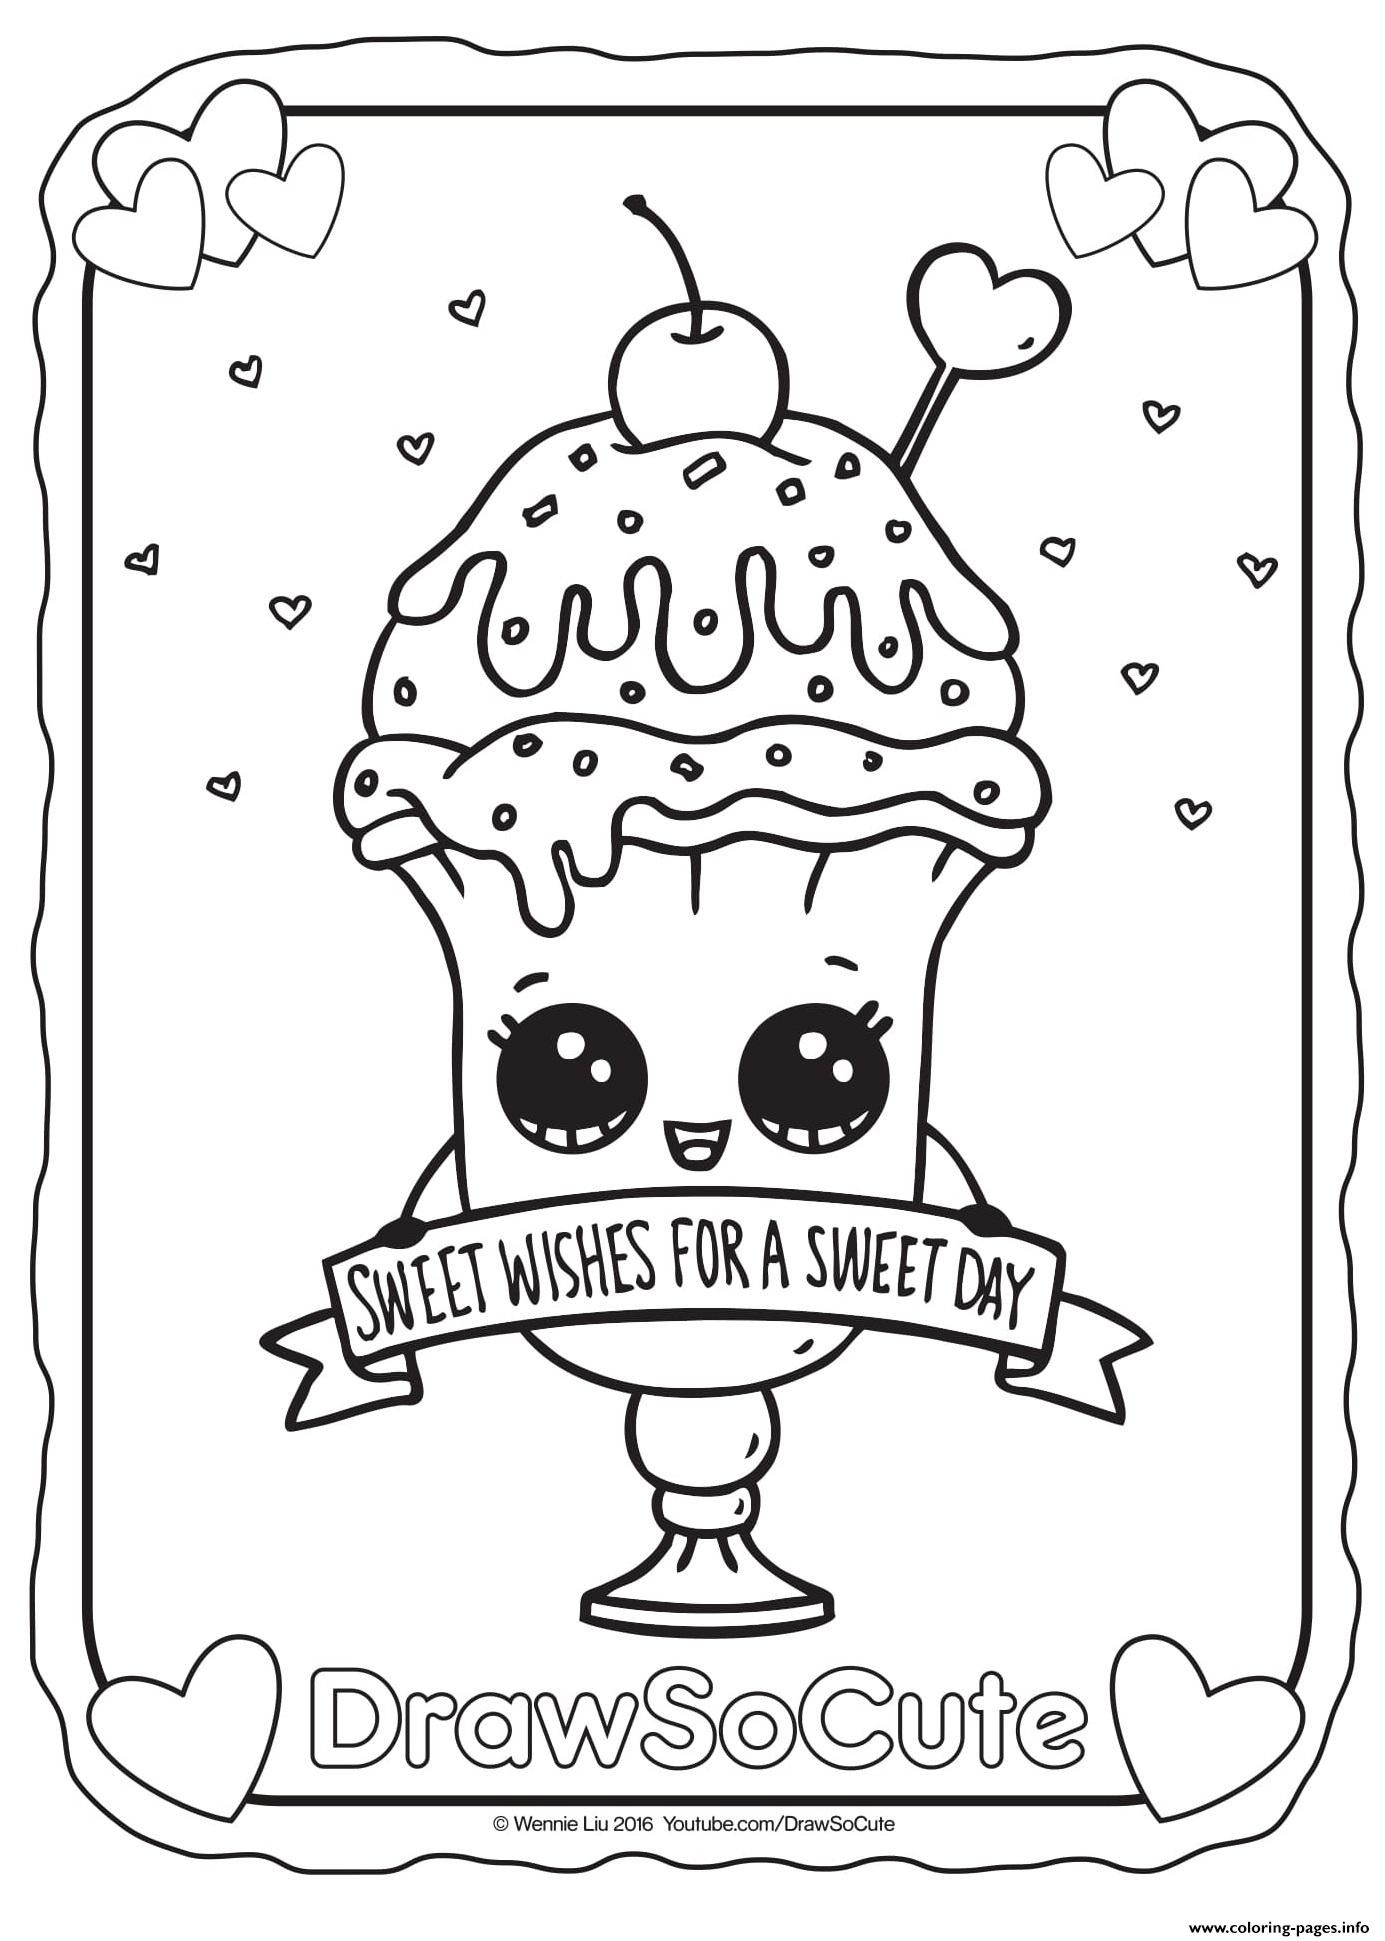 Draw so Cute Coloring Pages